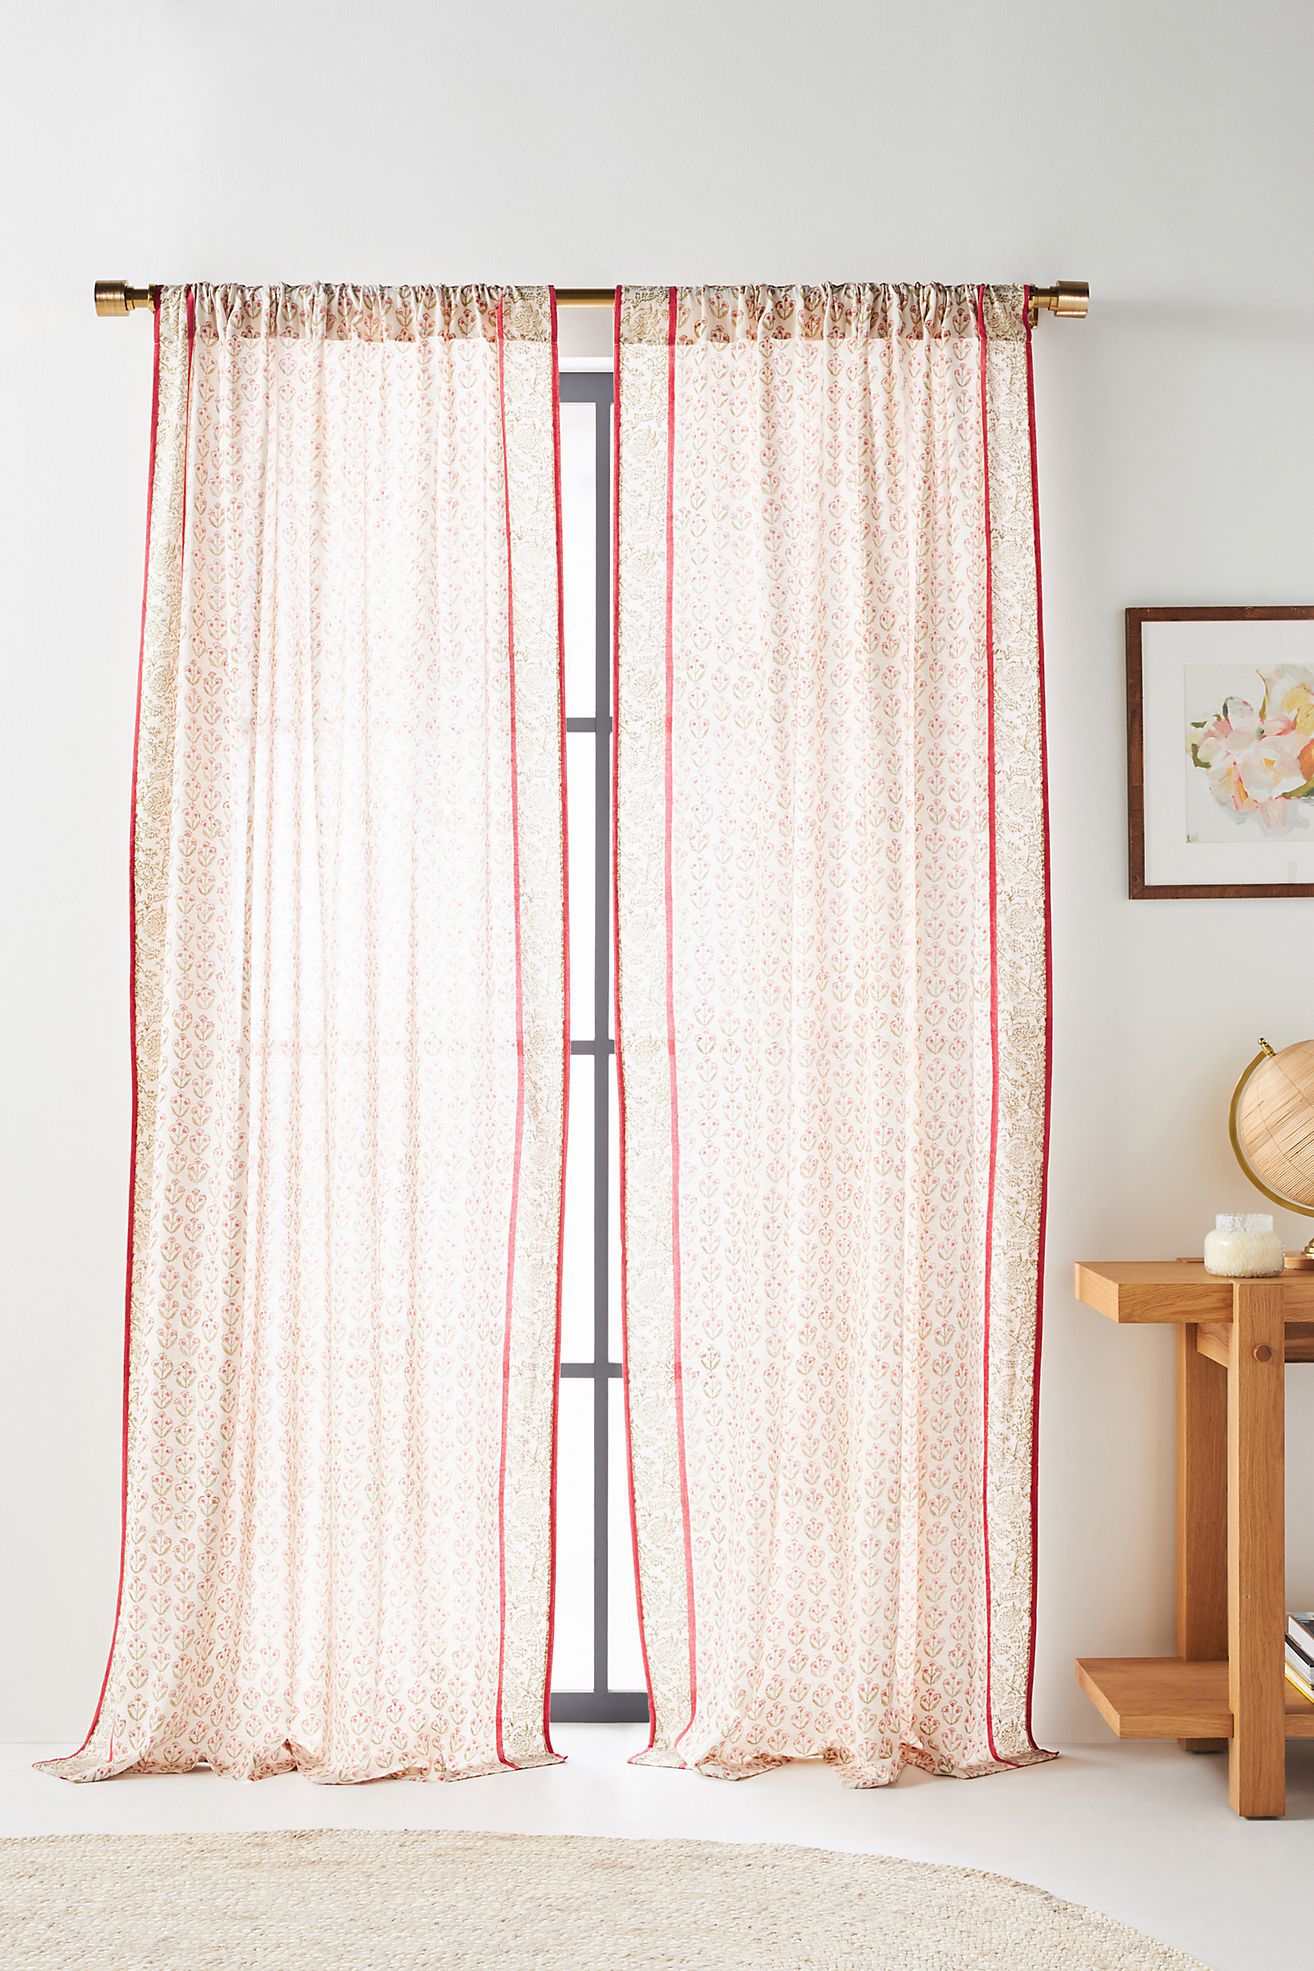 Hand Printed Curtains